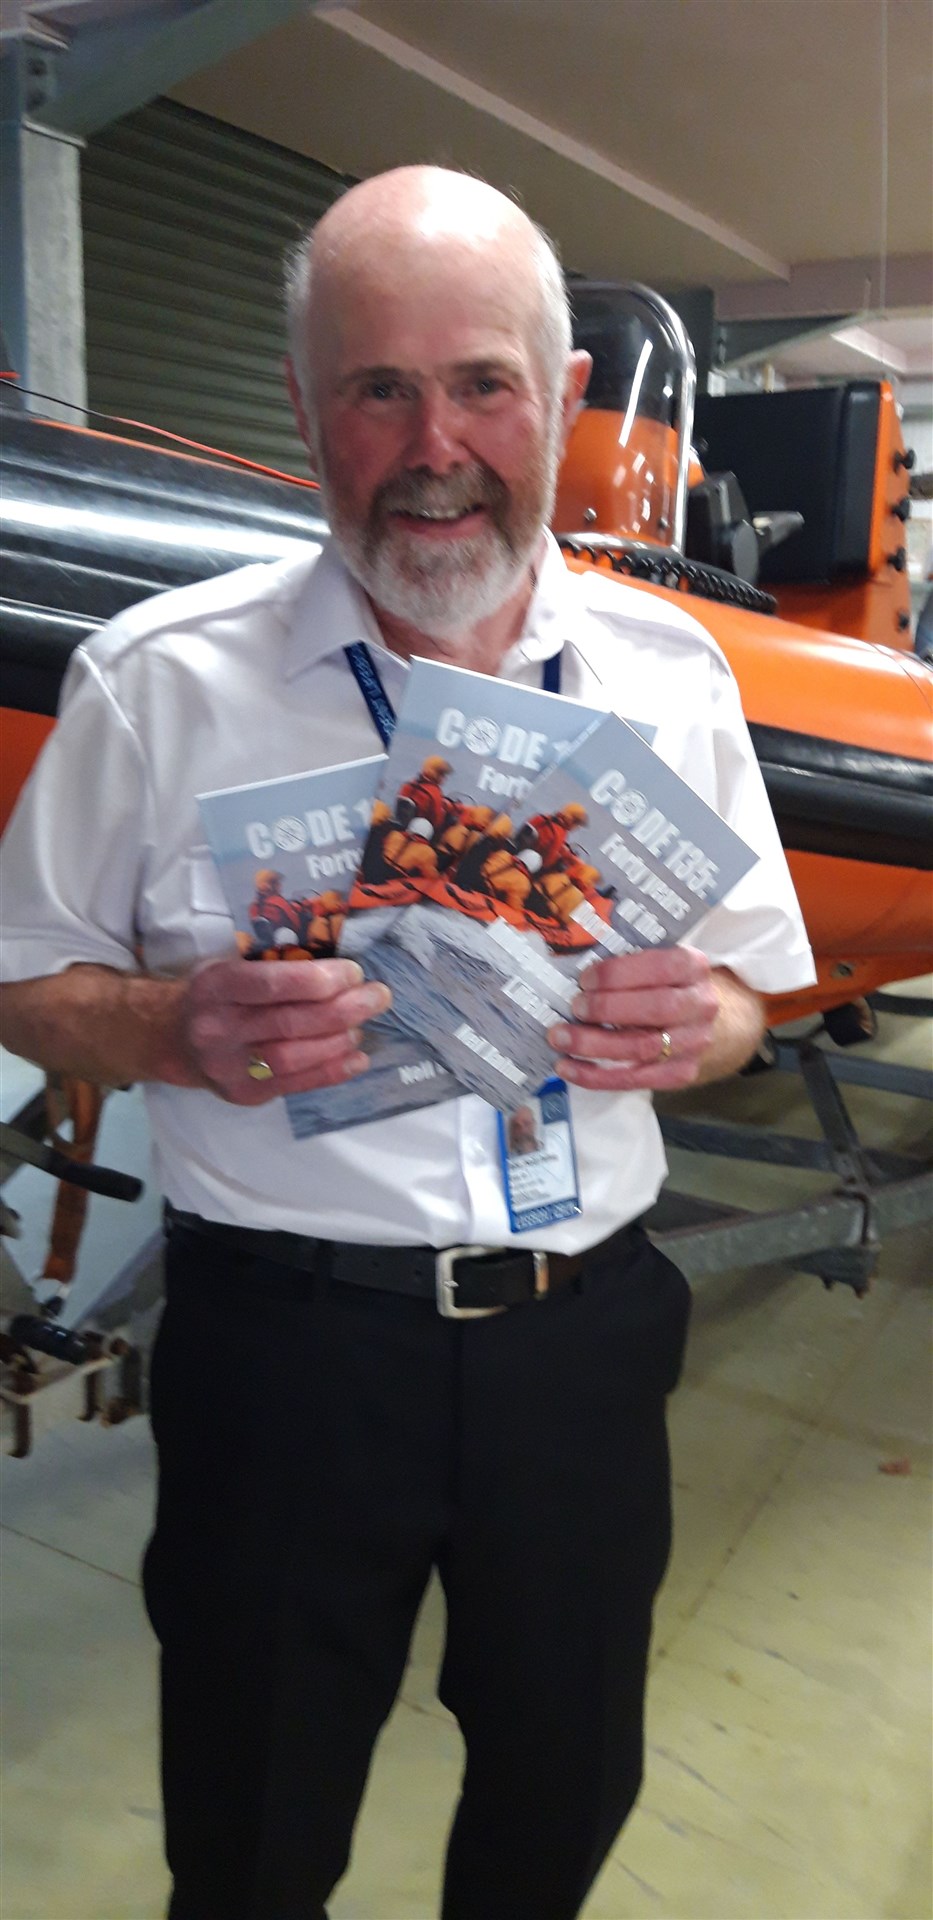 Neil Dalton has written a book "Code135: Forty years of the Dornoch Firth Independent Lifeboat". It can be ordered on ESRA's website and all proceeds will go to the organisation.